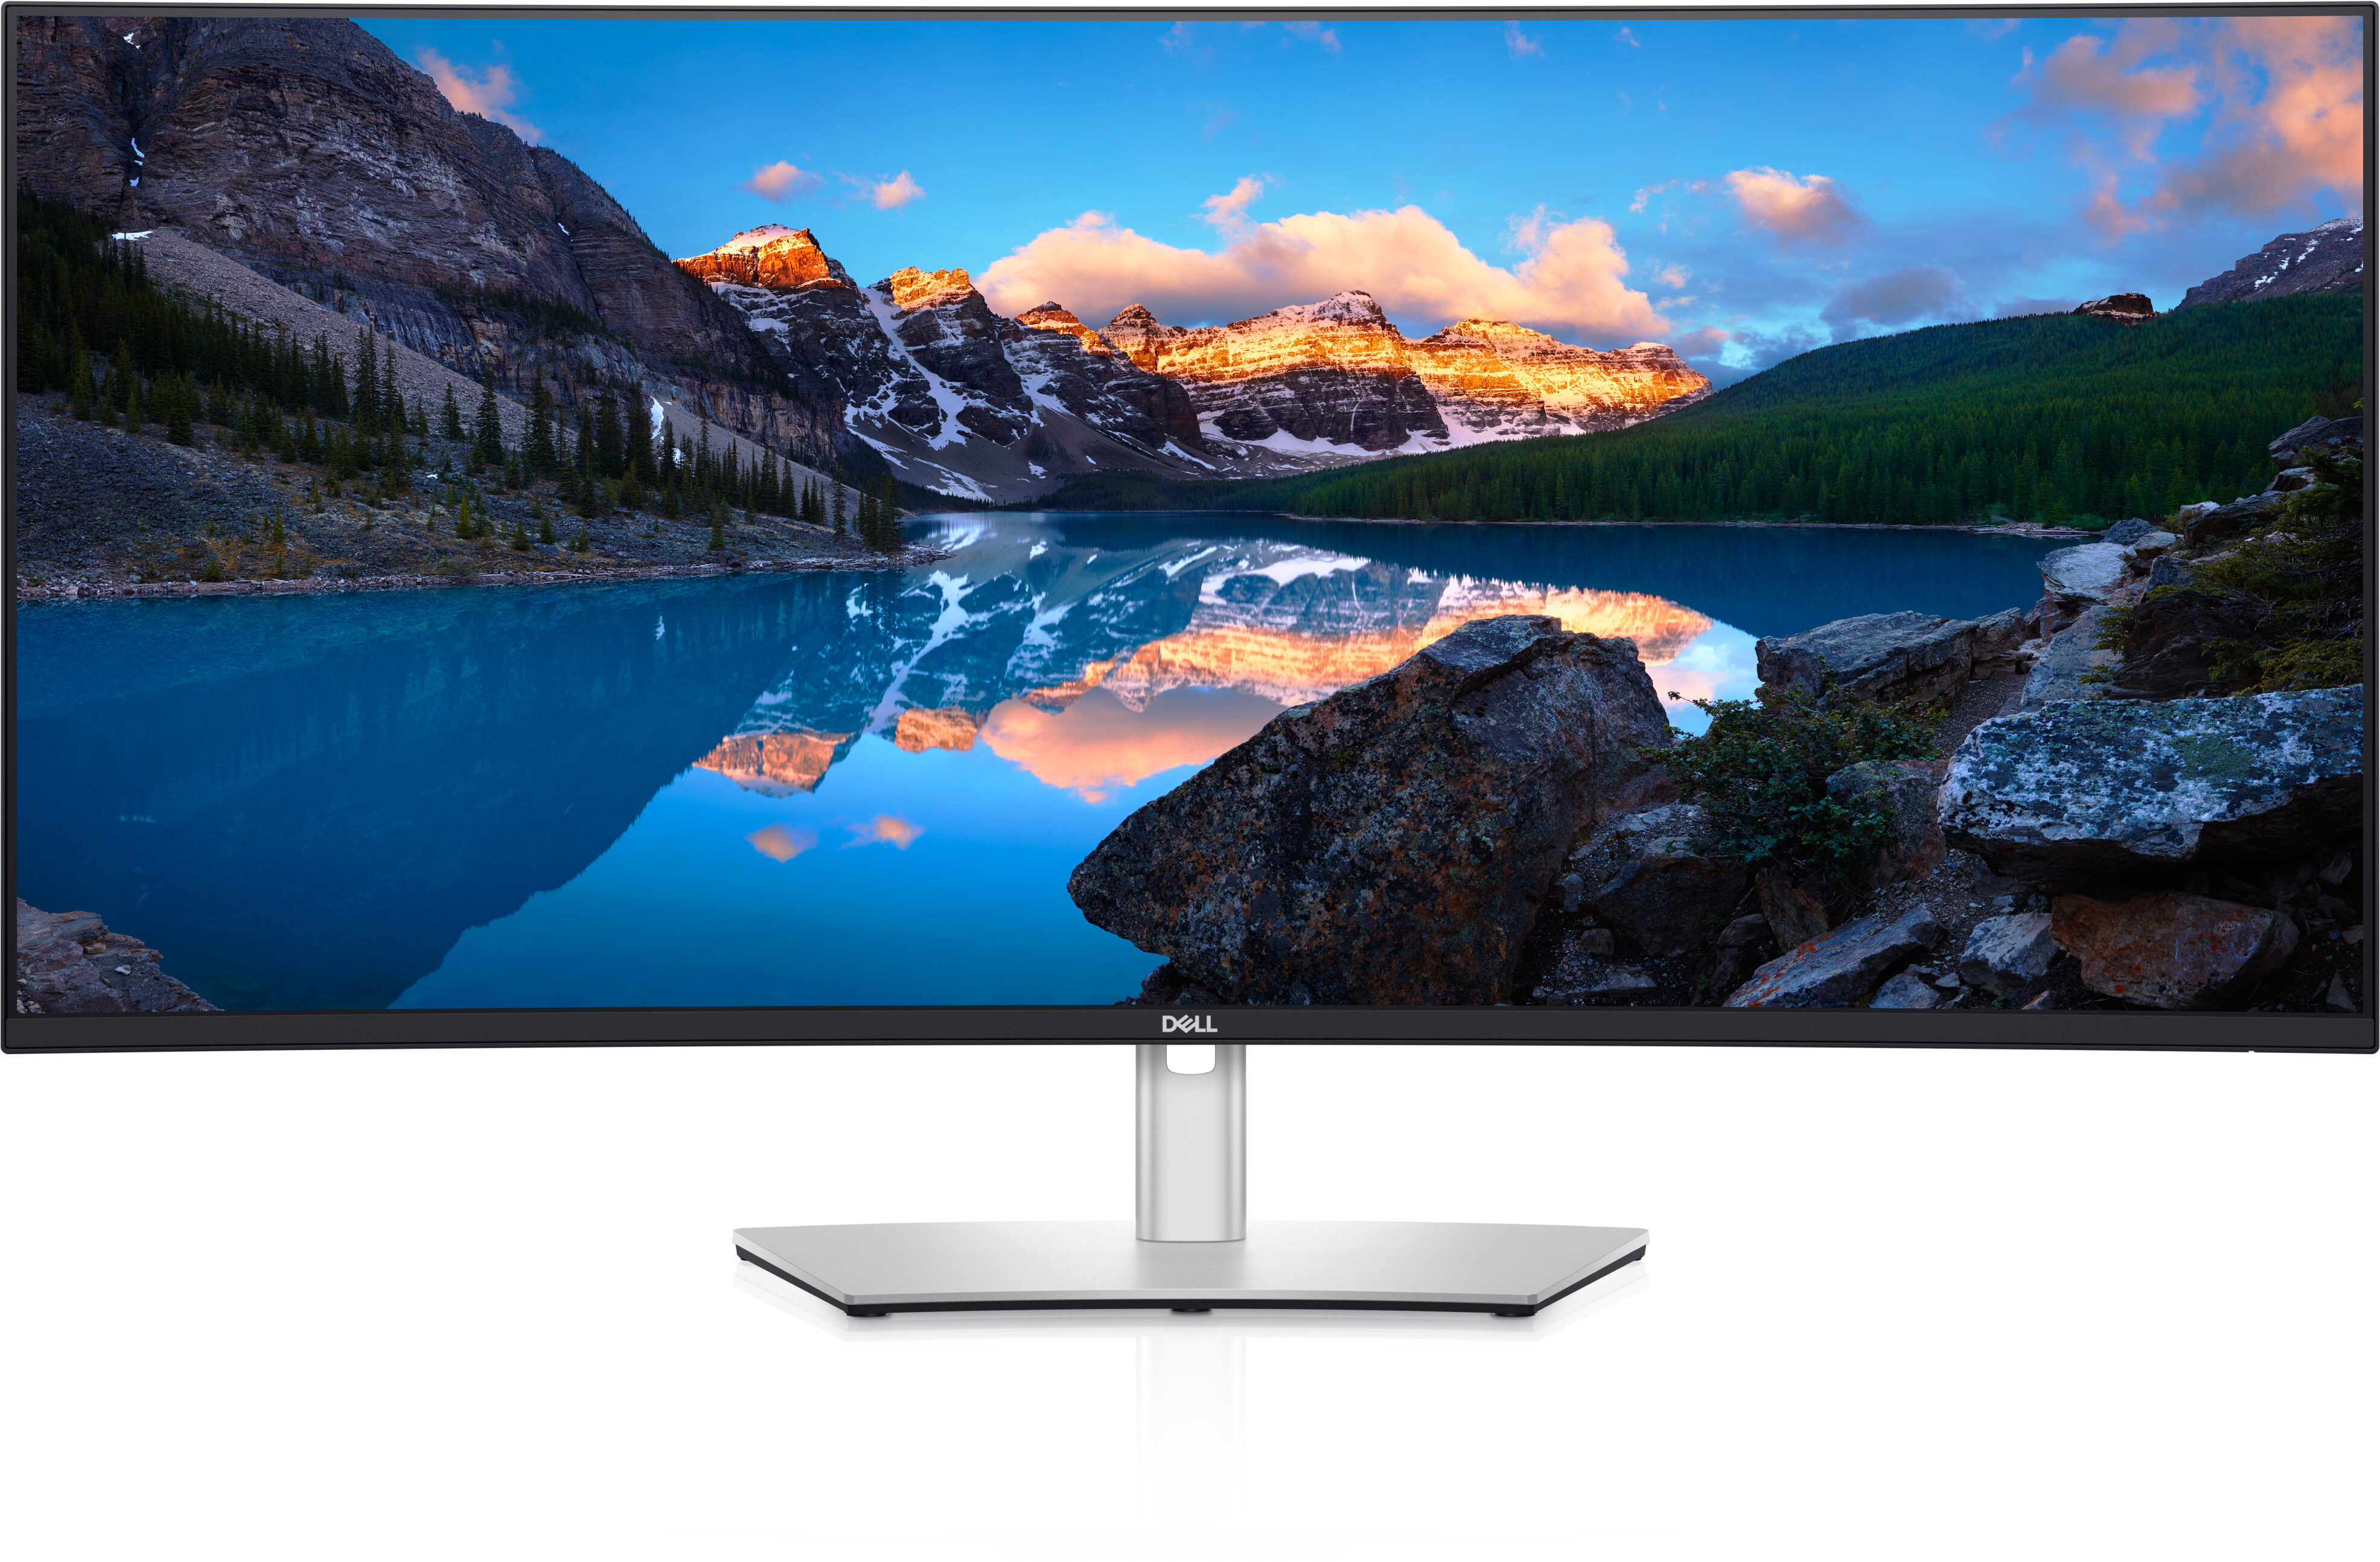 https://i.dell.com/is/image/DellContent//content/dam/images/products/electronics-and-accessories/dell/monitors/ultrasharp/u4021qw/u4021qw-cfp-00000ff090-sl.psd?fmt=pjpg&pscan=auto&scl=1&wid=3943&hei=2587&qlt=100,1&resMode=sharp2&size=3943,2587&chrss=full&imwidth=5000